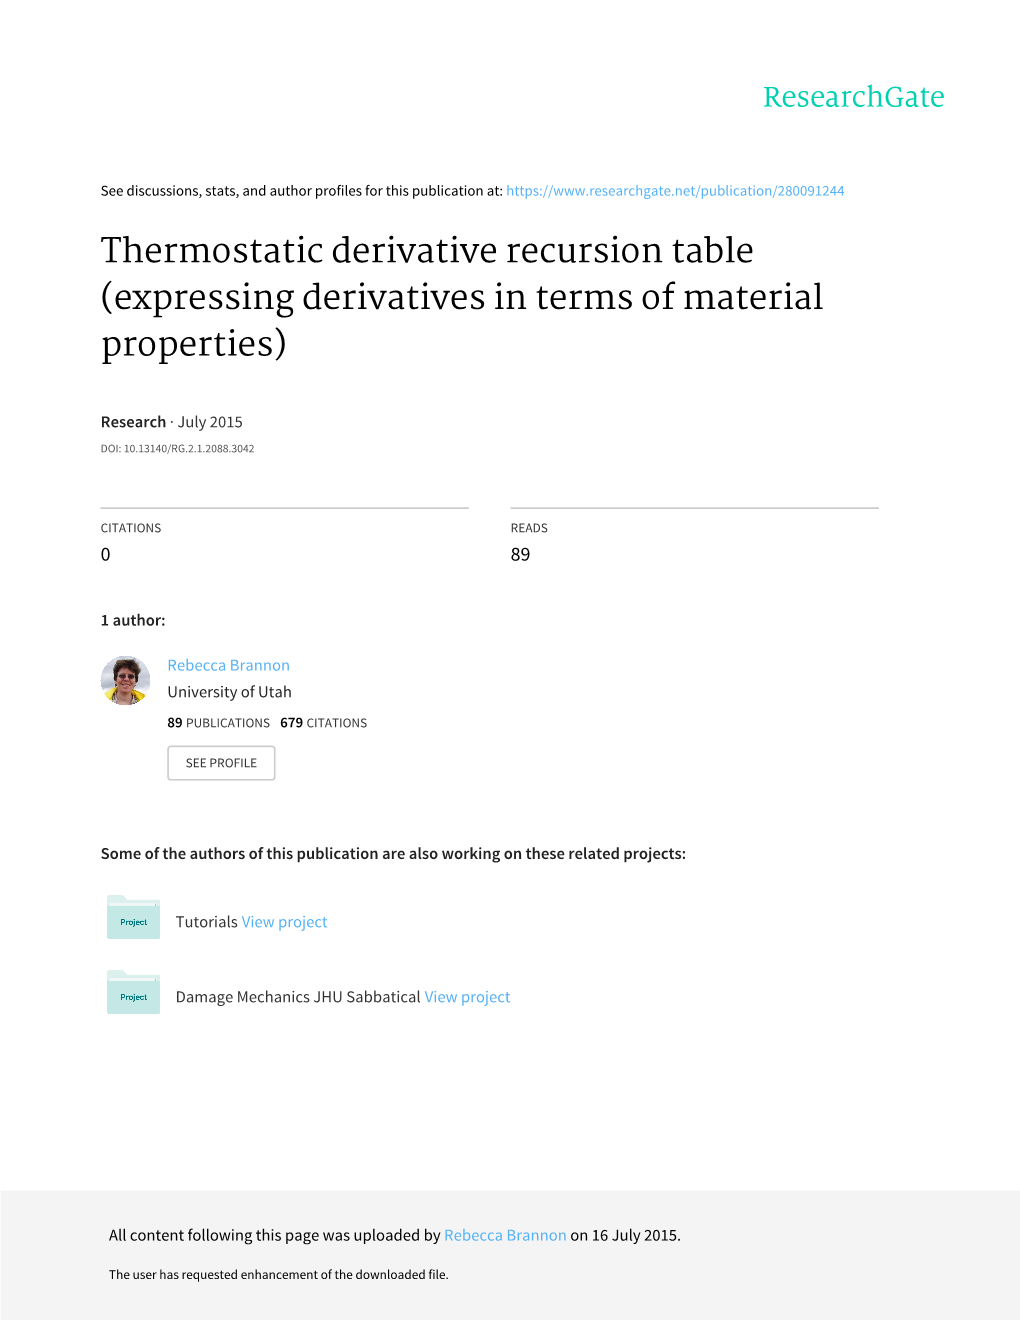 Thermostatic Derivative Recursion Table (Expressing Derivatives in Terms of Material Properties)